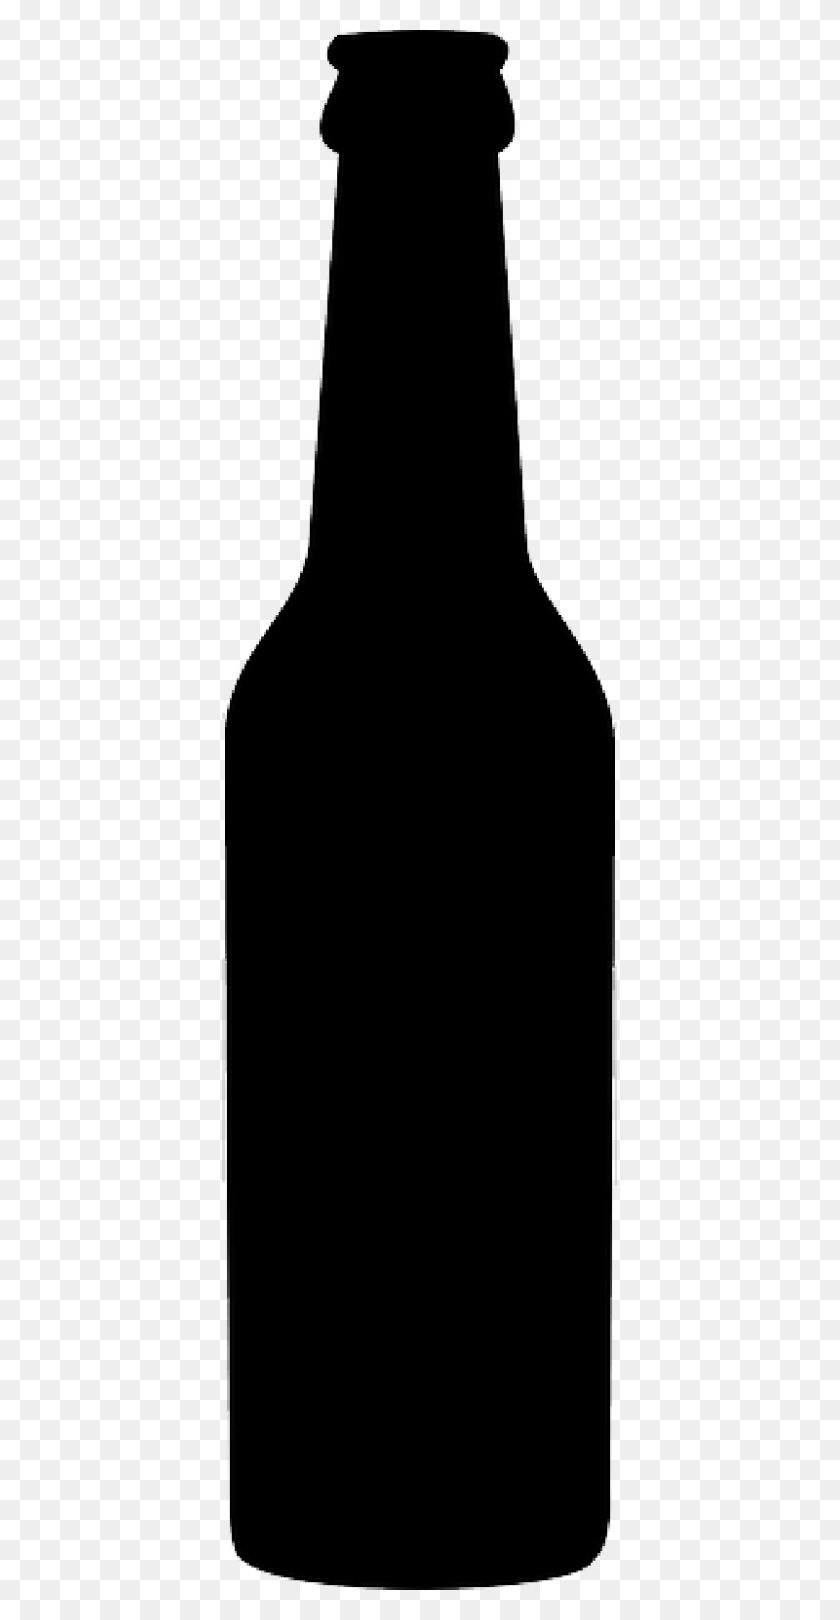 800x1600 Beer Bottle Cliparts Free Download Clip Art - Beer Glass Clipart Black And White